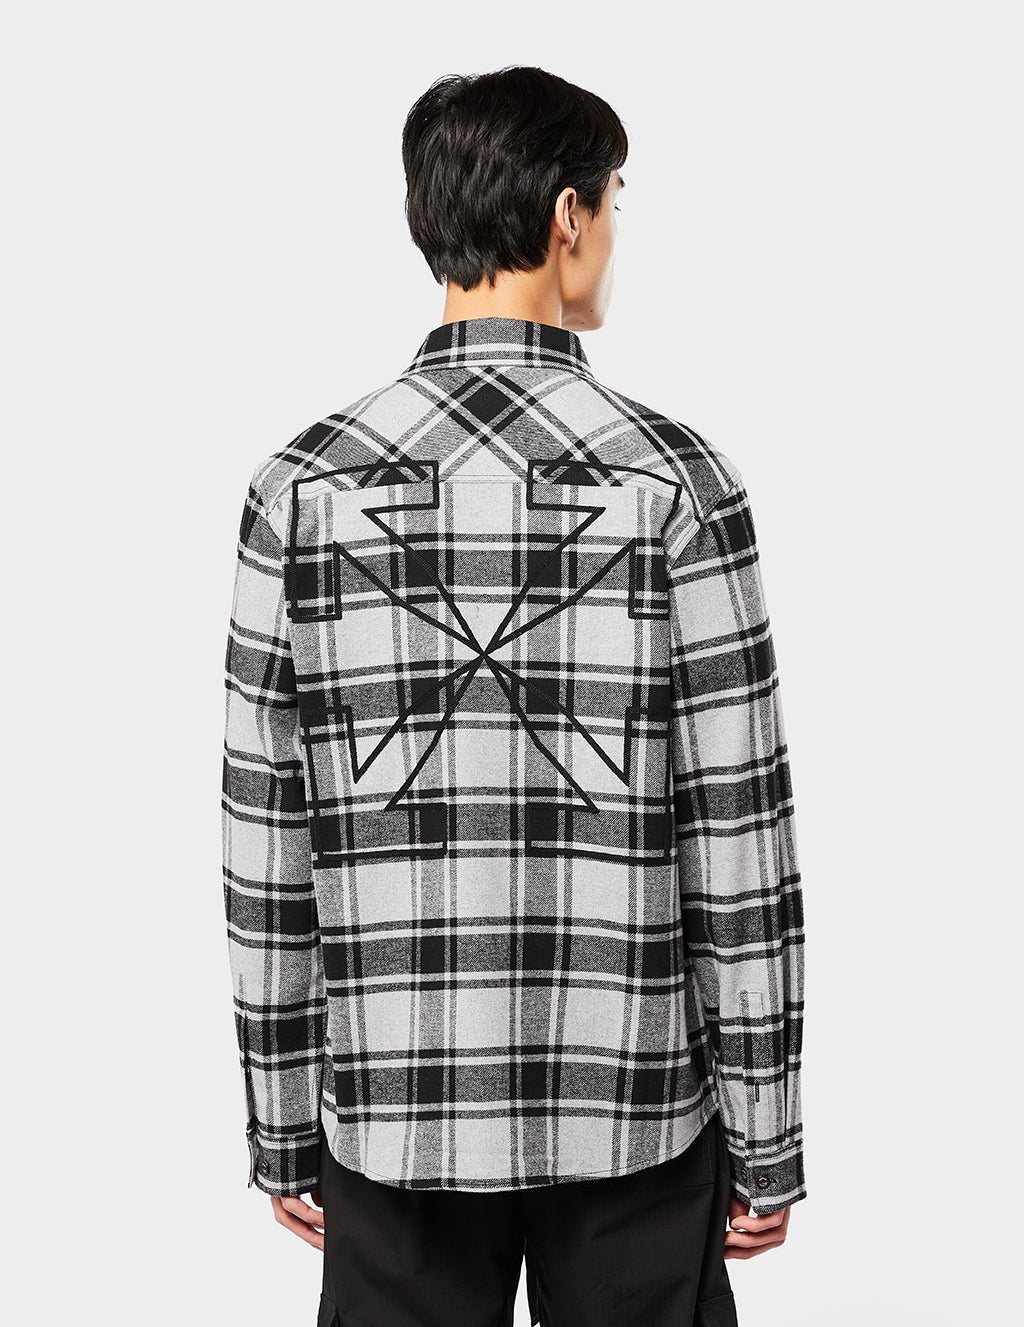 Off-White Men's Arrows Checked Flannel Shirt product